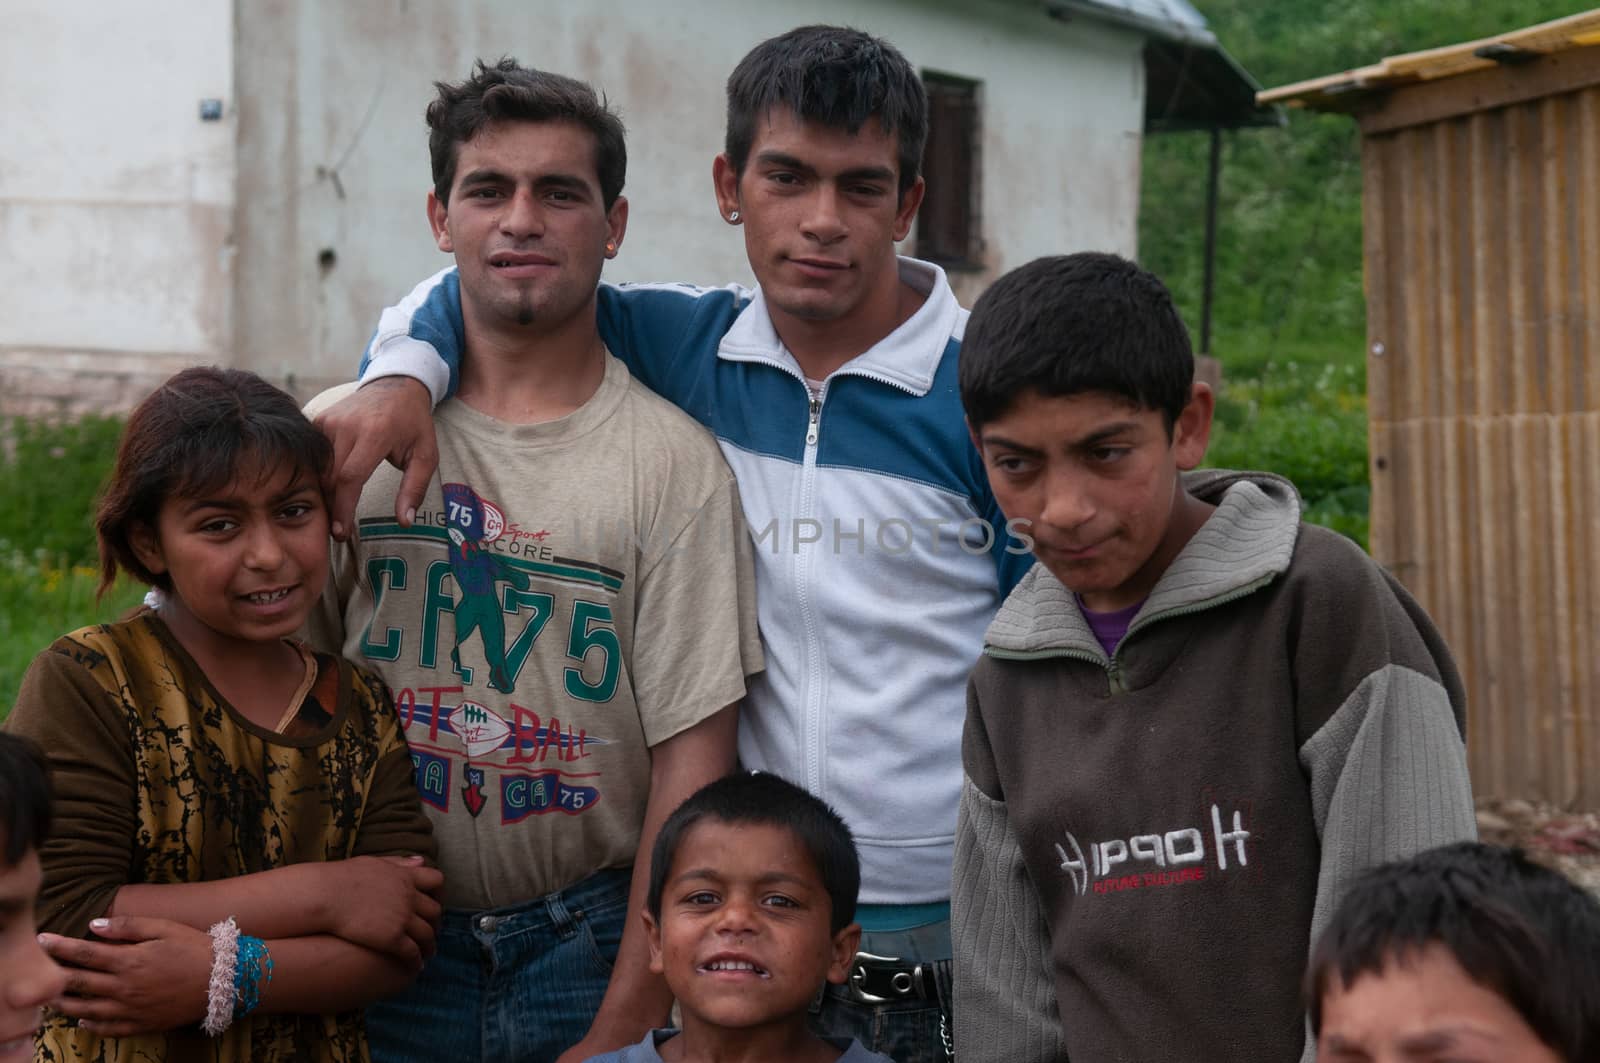 No opportunities for the Roma people in Slovakia. They suffer discrimination, poverty with no dignity. by gonzalobell